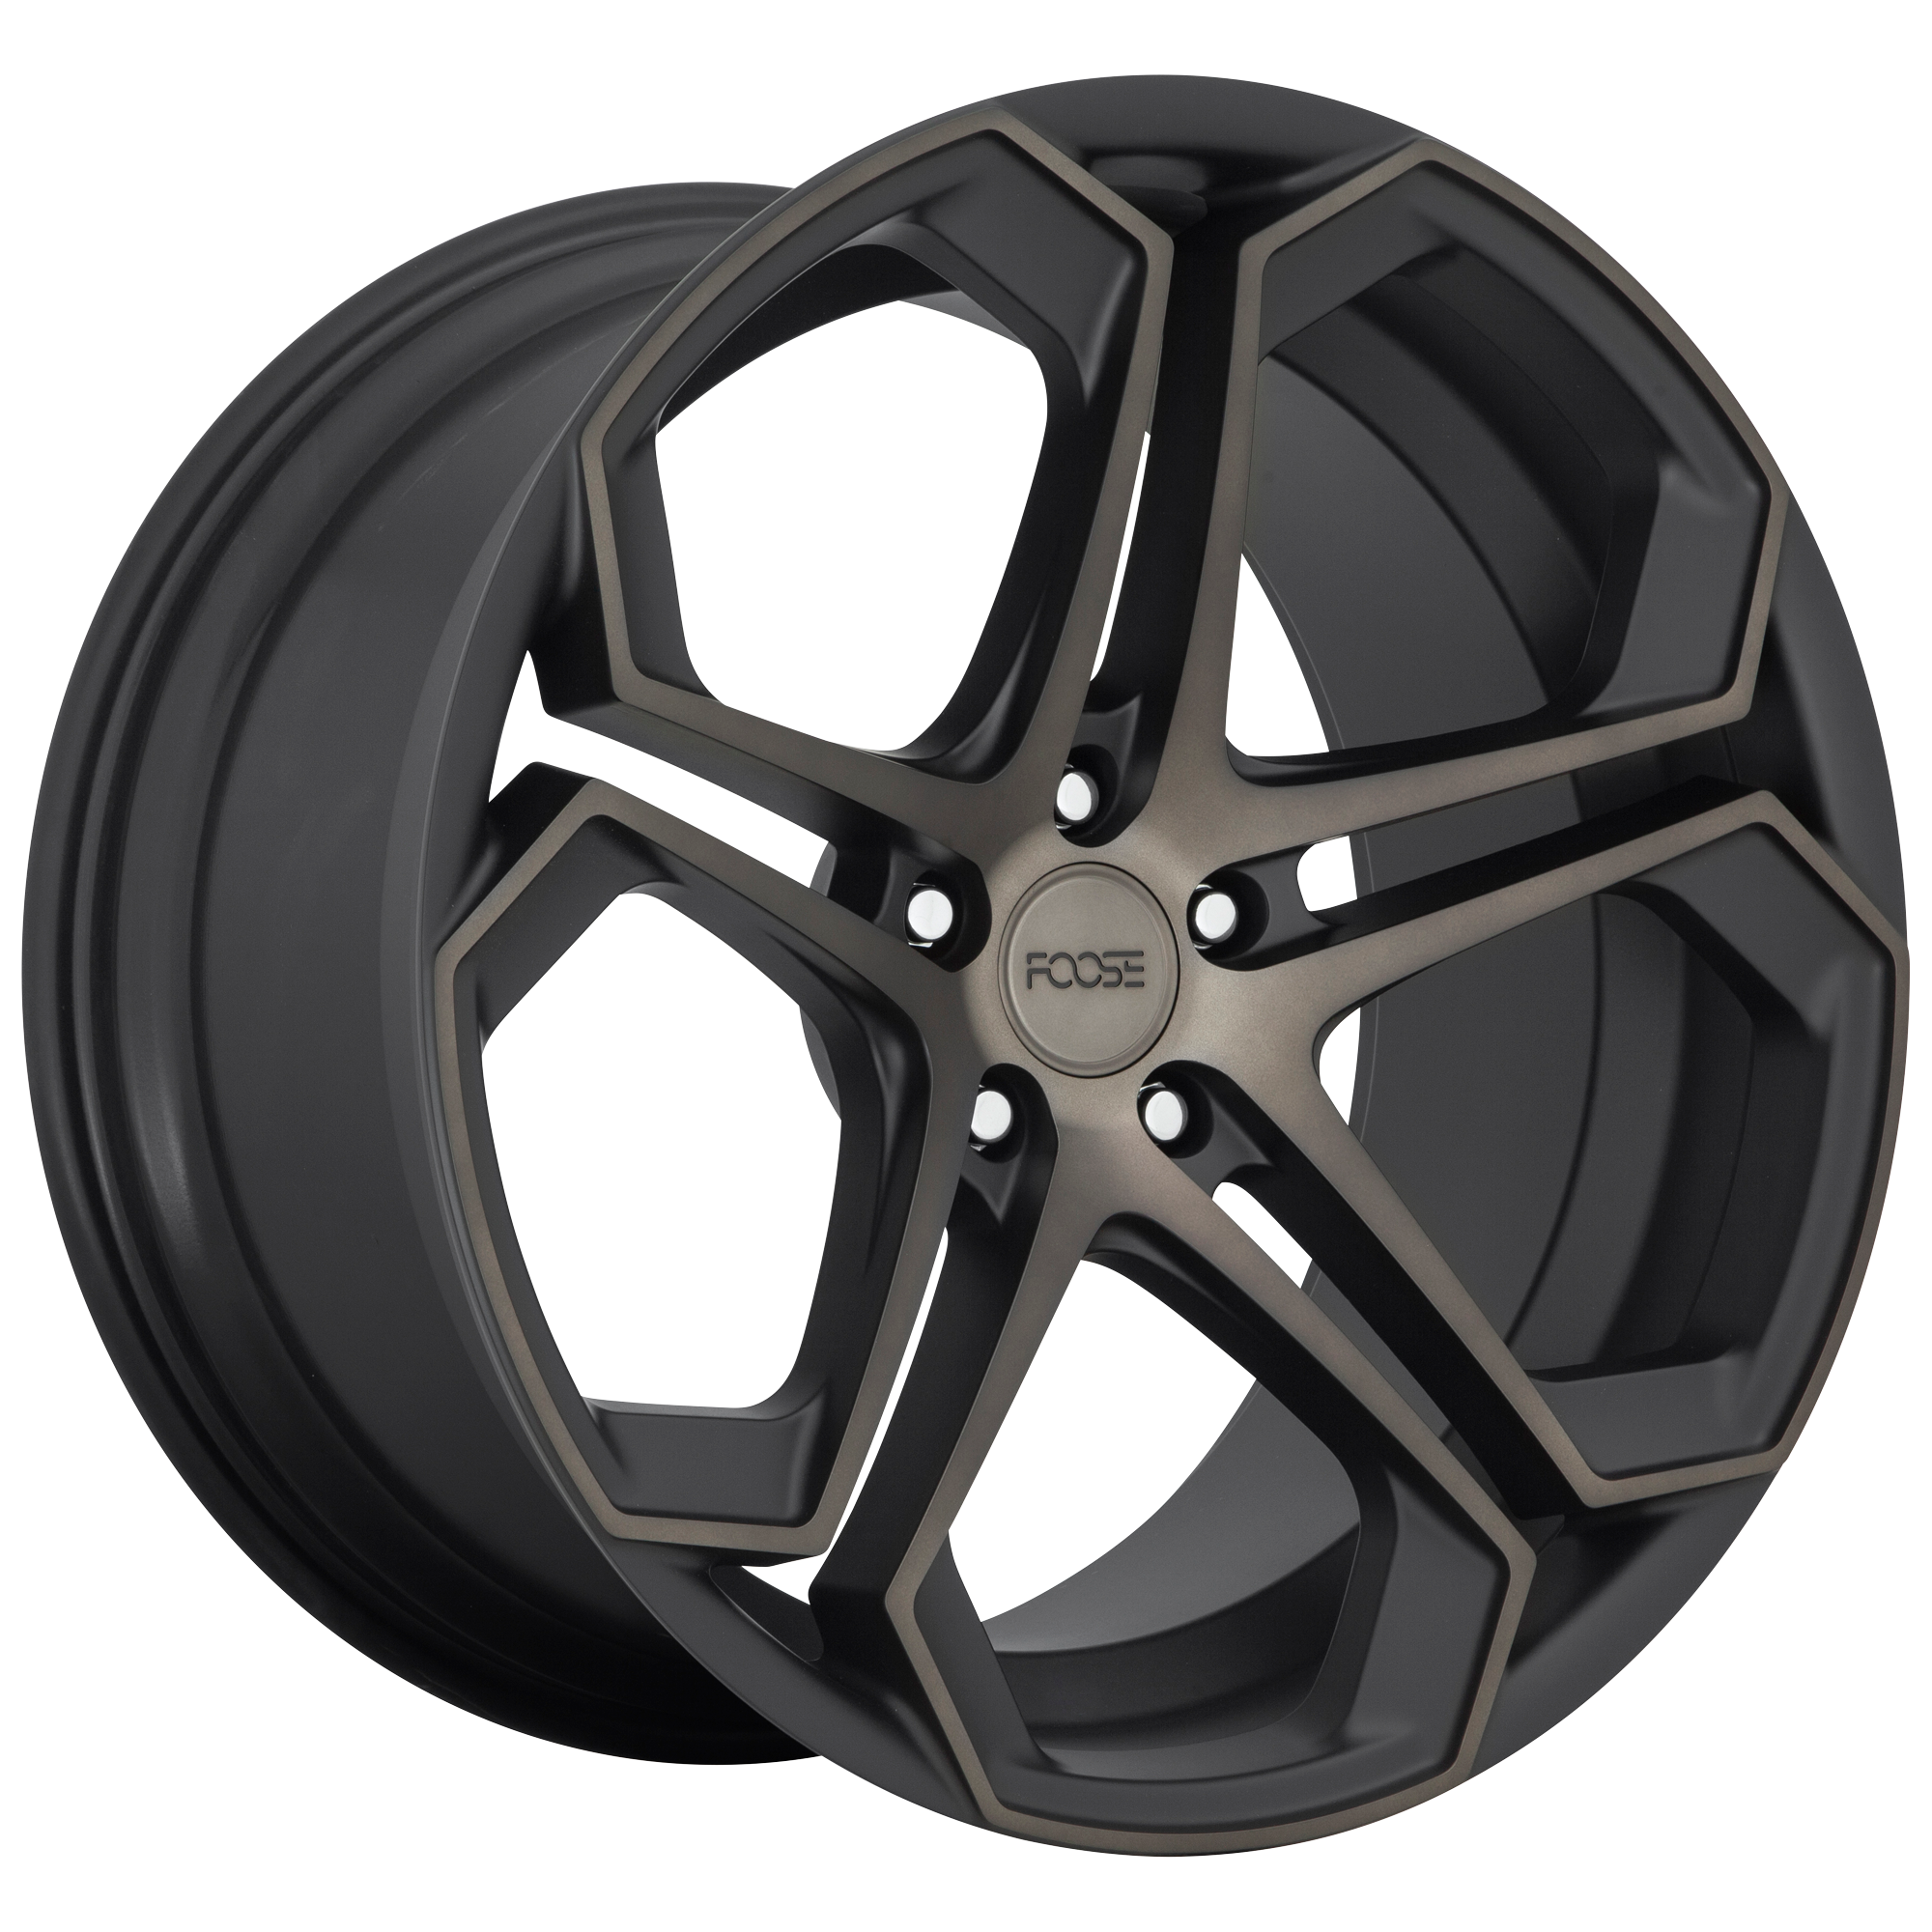 IMPALA 20x9 5x115.00 MATTE MACHINED DOUBLE DARK TINT (18 mm) - Tires and Engine Performance